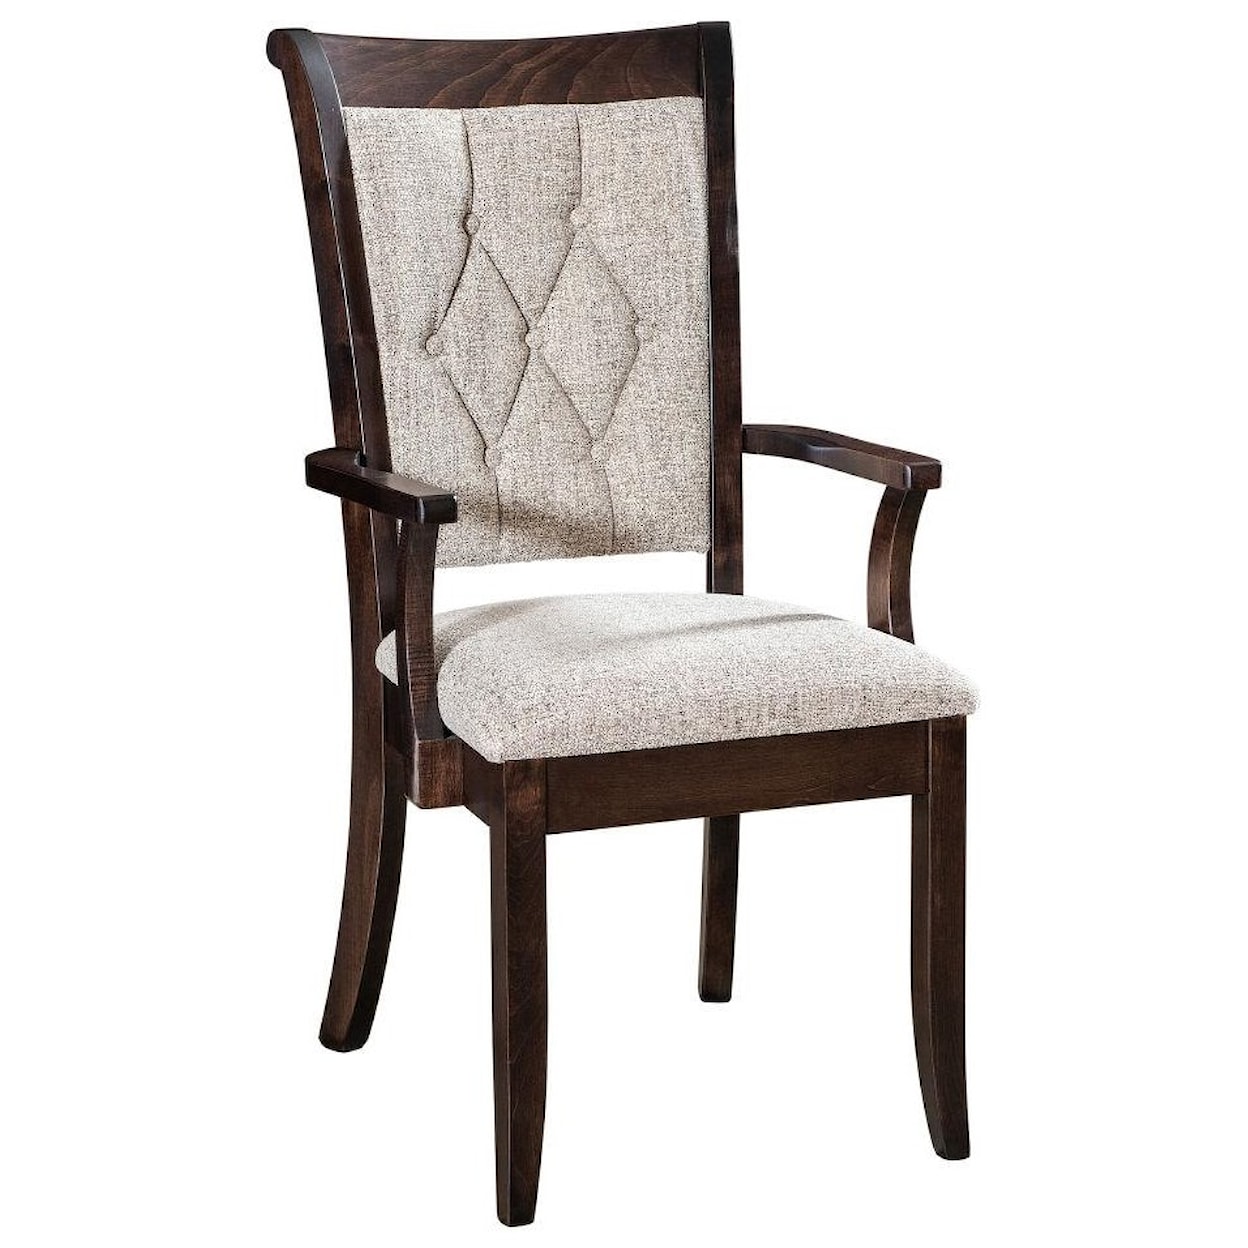 F&N Woodworking Chelsea Arm Chair